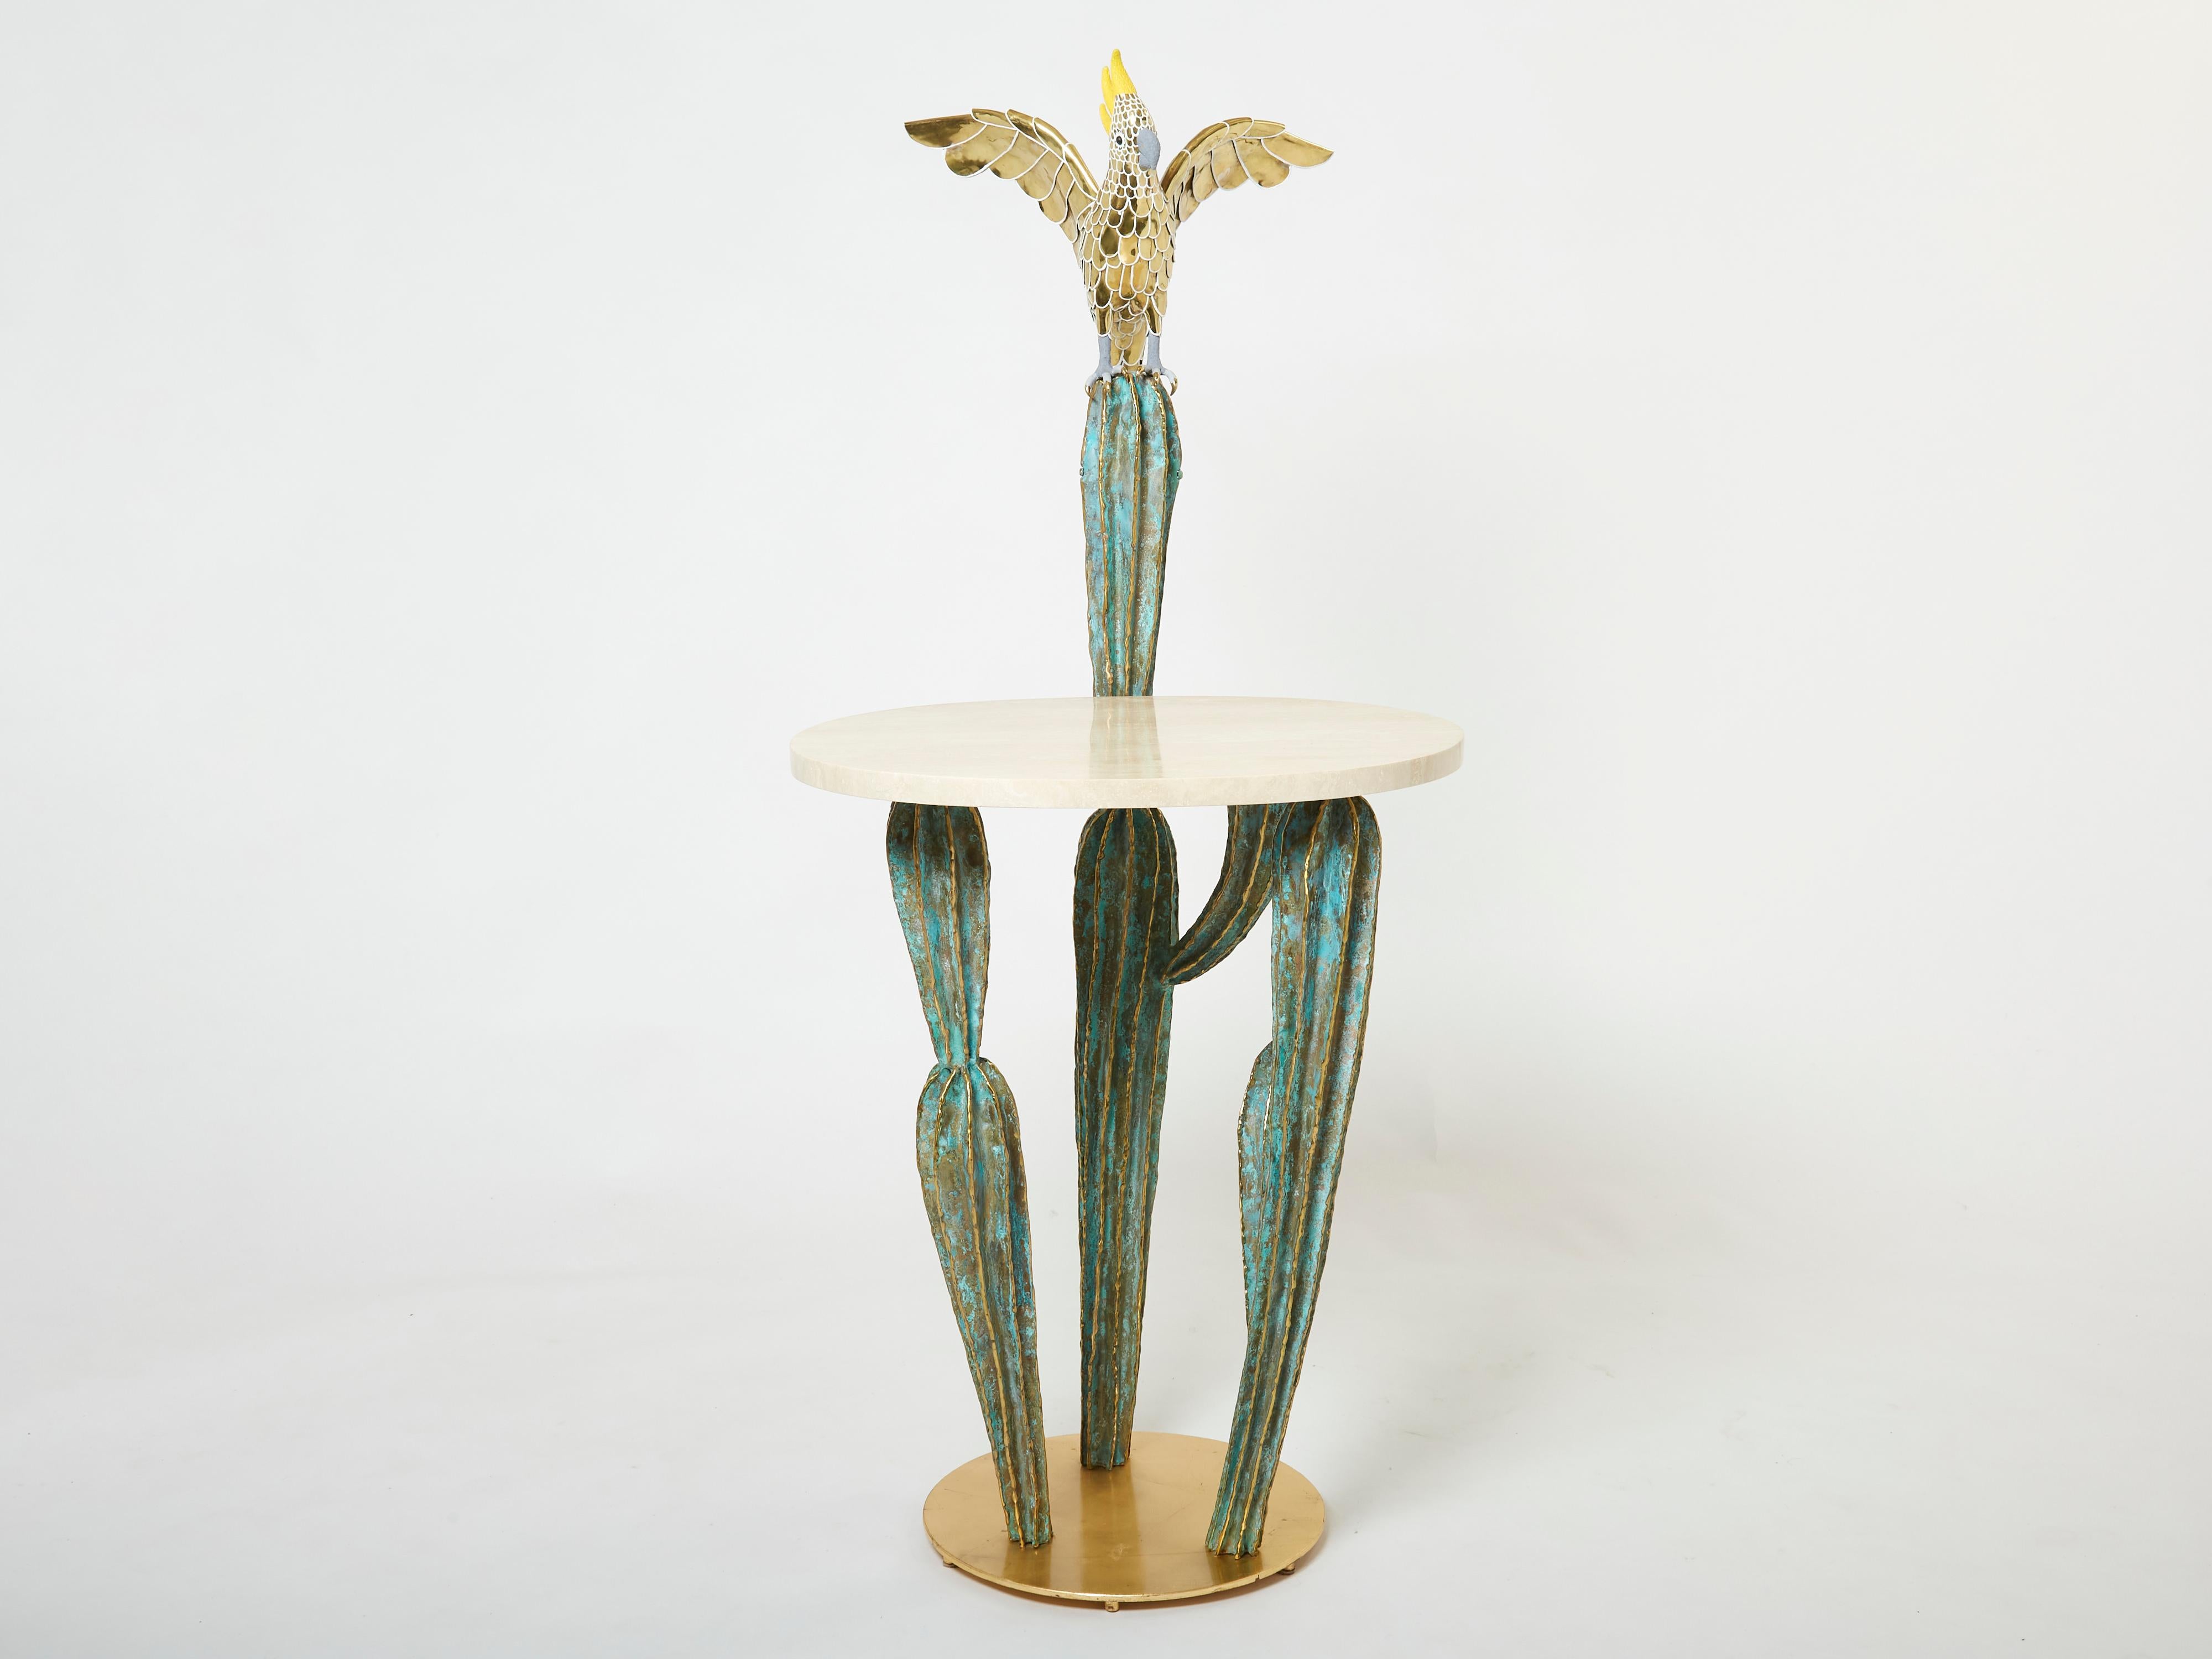 Unique Signed Alain Chervet Brass Cactus and Parrot Console Table 1989 In Good Condition For Sale In Paris, IDF